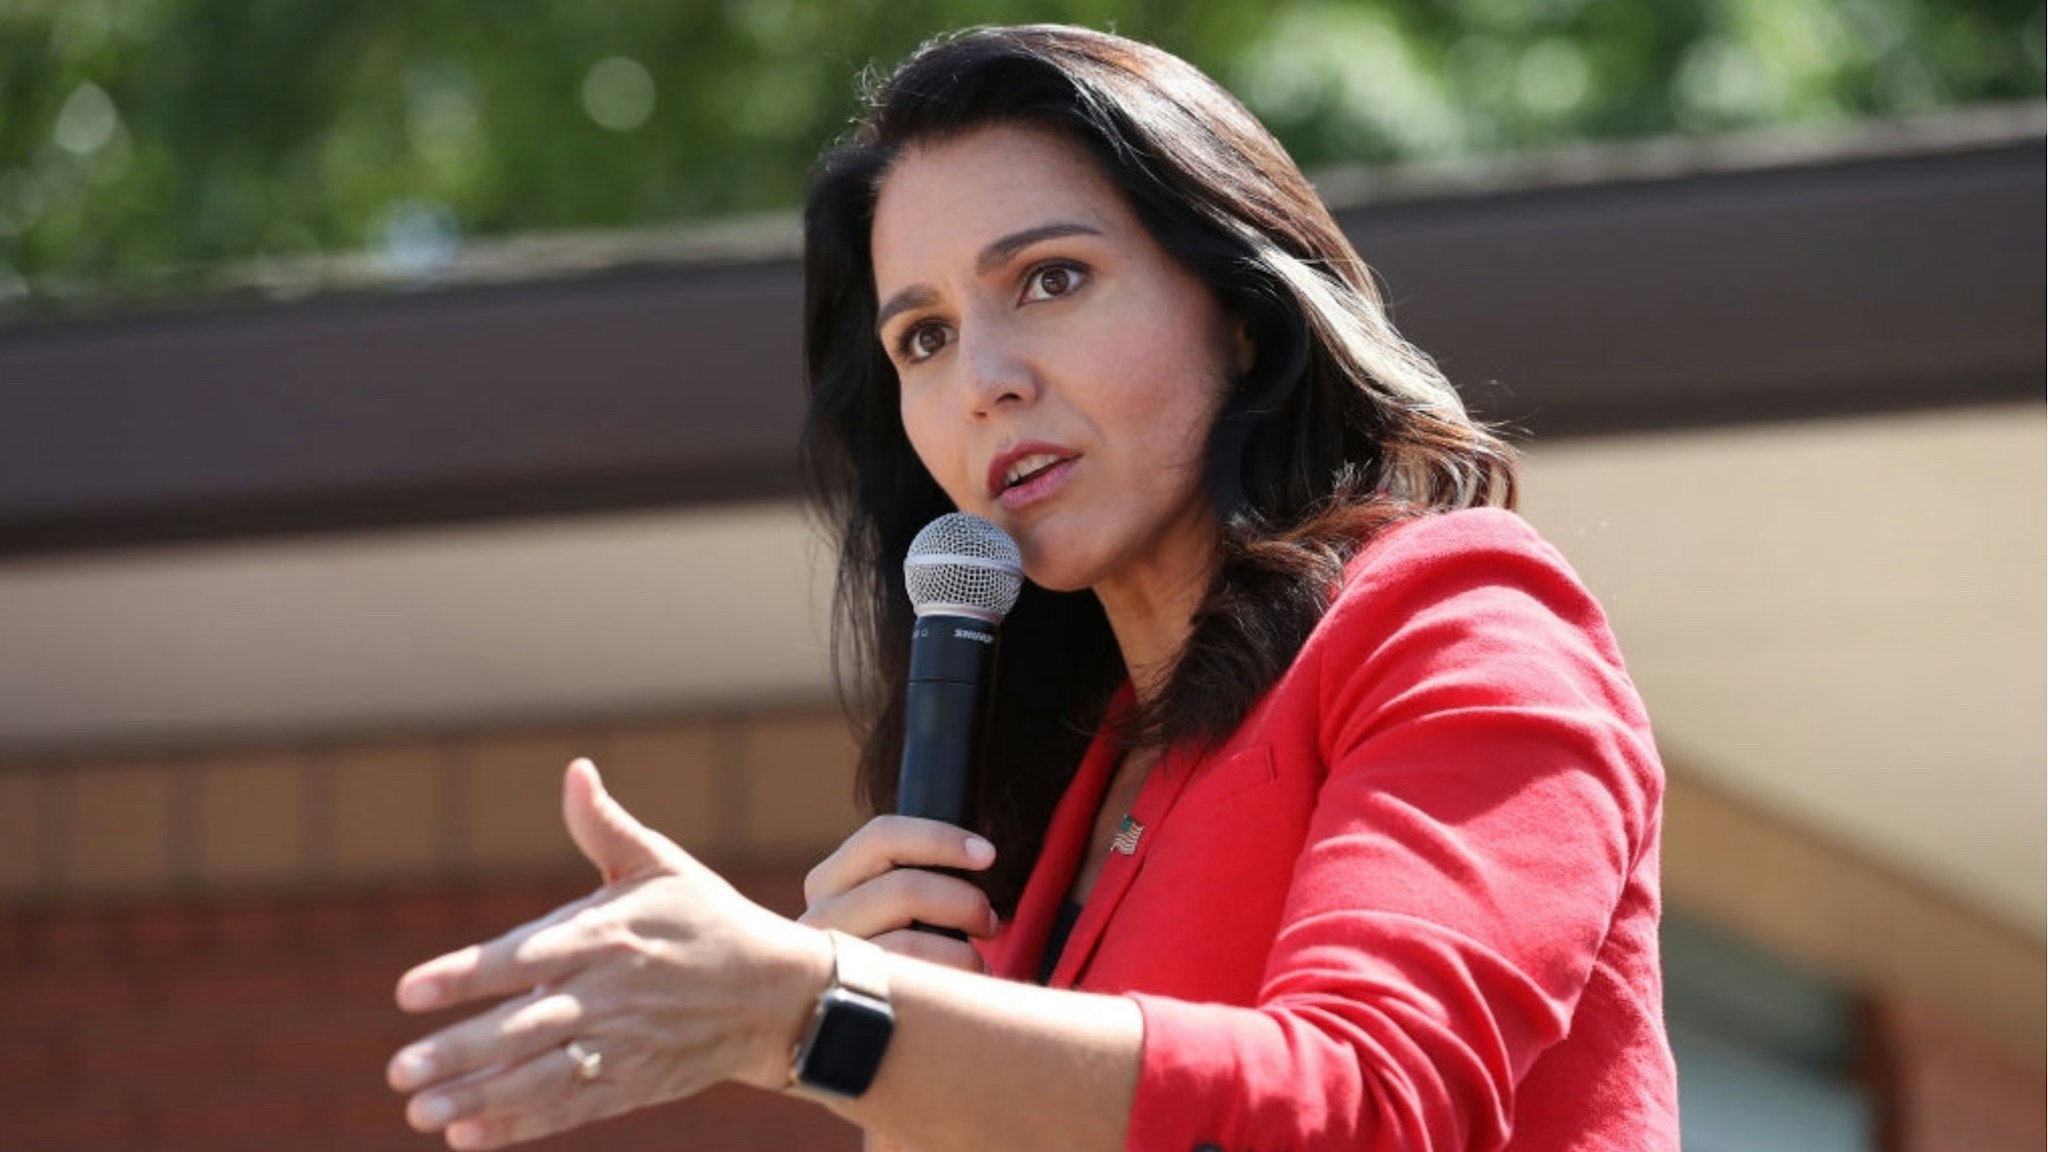 Democratic presidential candidate Rep. Tulsi Gabbard (D-HI) delivers a 20-minute campaign speech at the Des Moines Register Political Soapbox during the Iowa State Fair August 09, 2019 in Des Moines, Iowa.